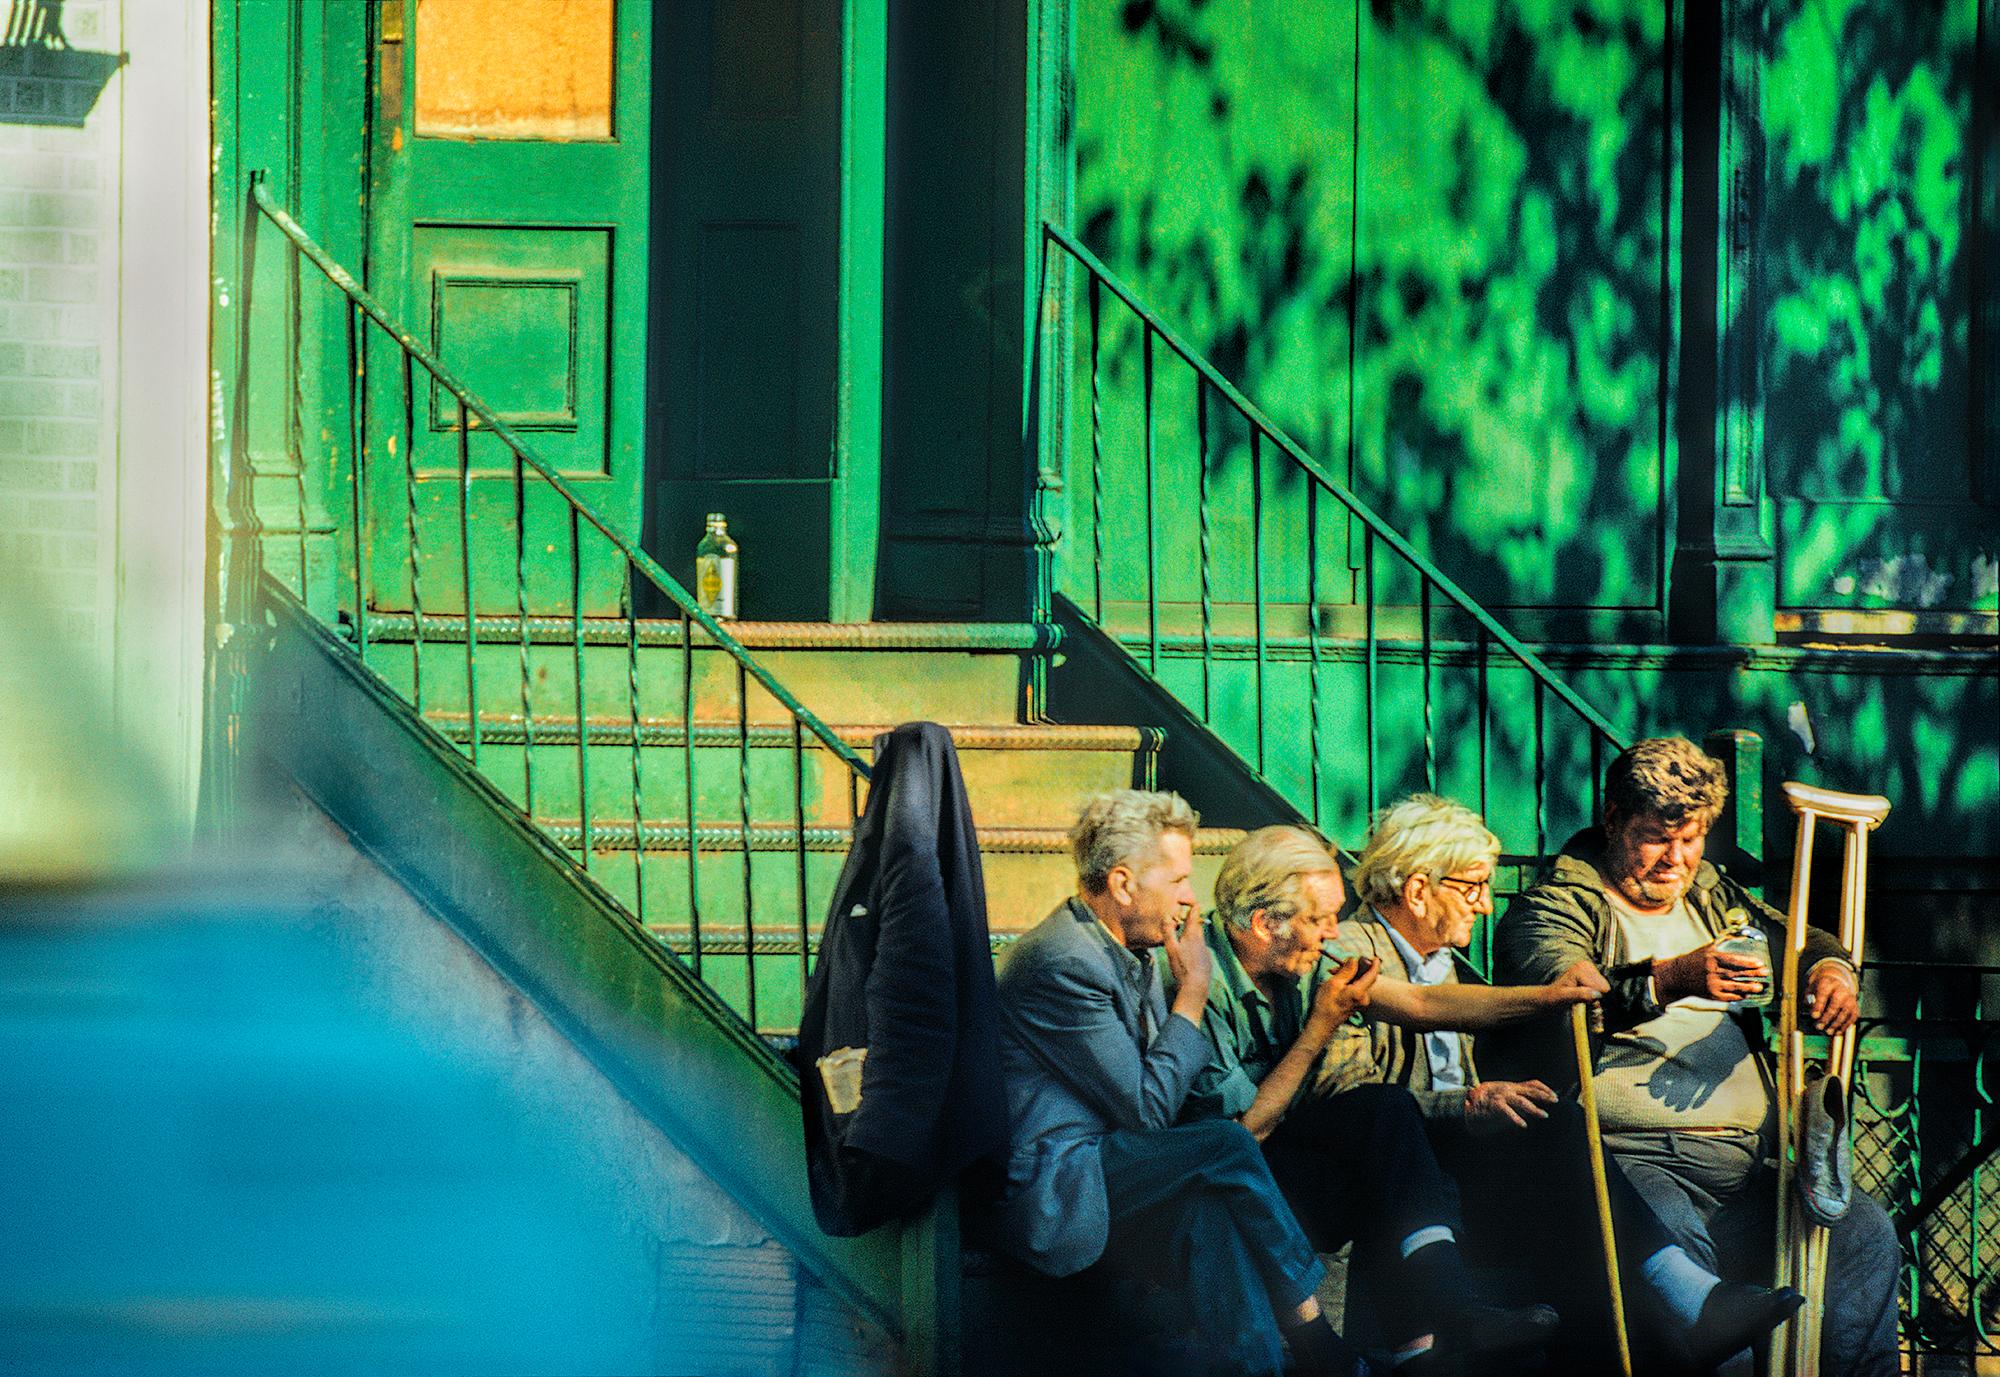 Mitchell Funk Color Photograph - East Village Bums, Tramps Smoking and Drinking at Blue Green Wall